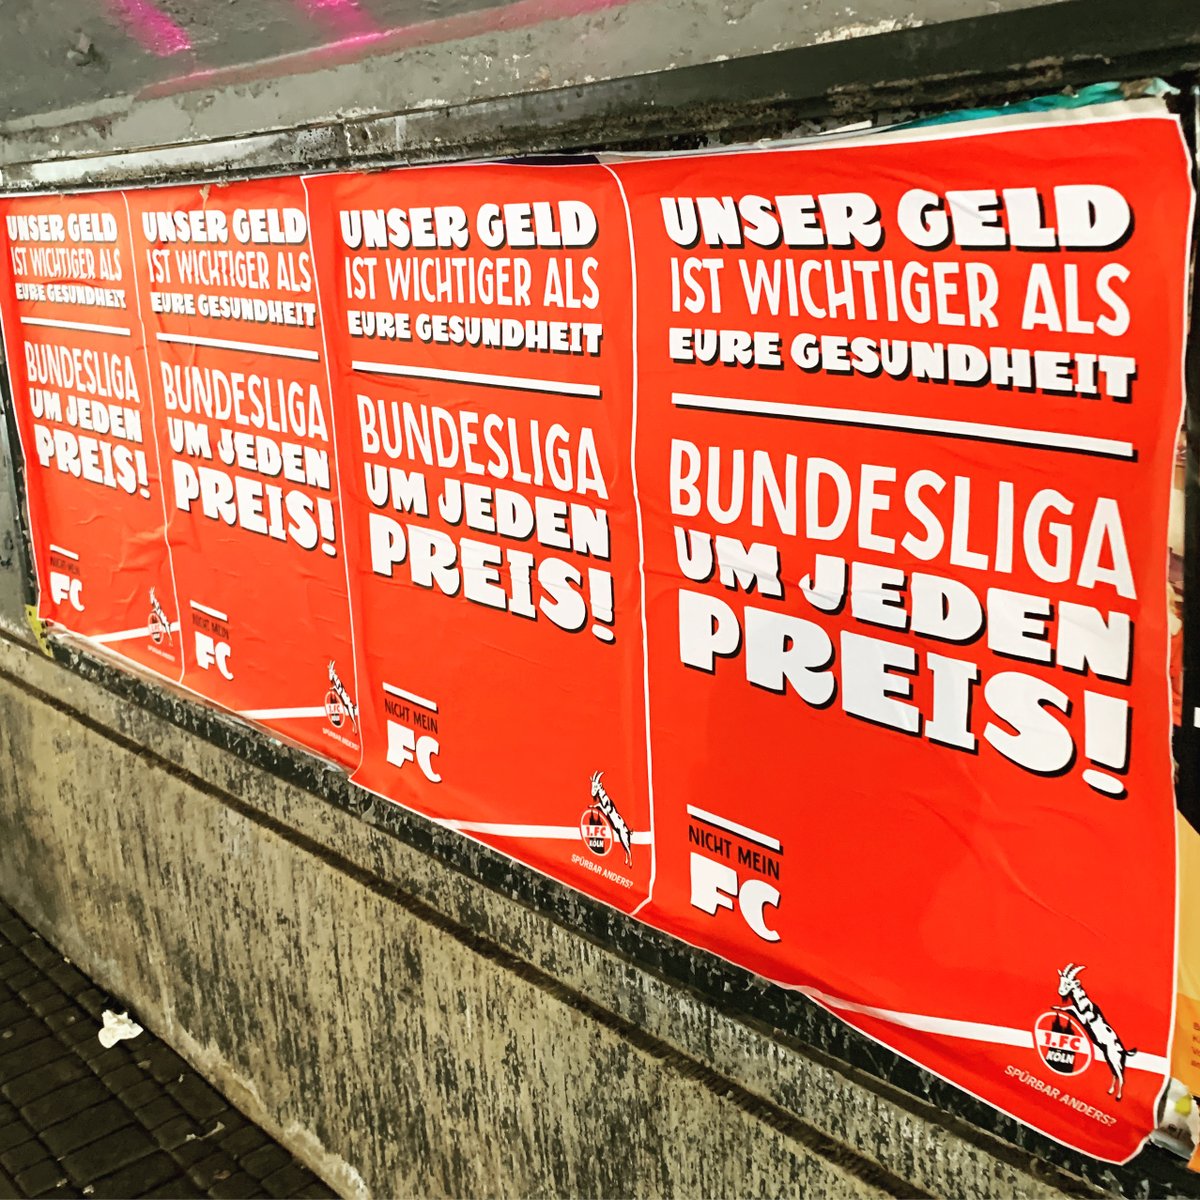 Some media, politicians, police chiefs in Germany spoke about the possibility of ultras/fans attending games despite the Geisterspiele.Incidents during the 1., 2. Bundesliga games involving fans? 0.Were there clues to suggest this would be the case? Oh yes.Thread. 1/22